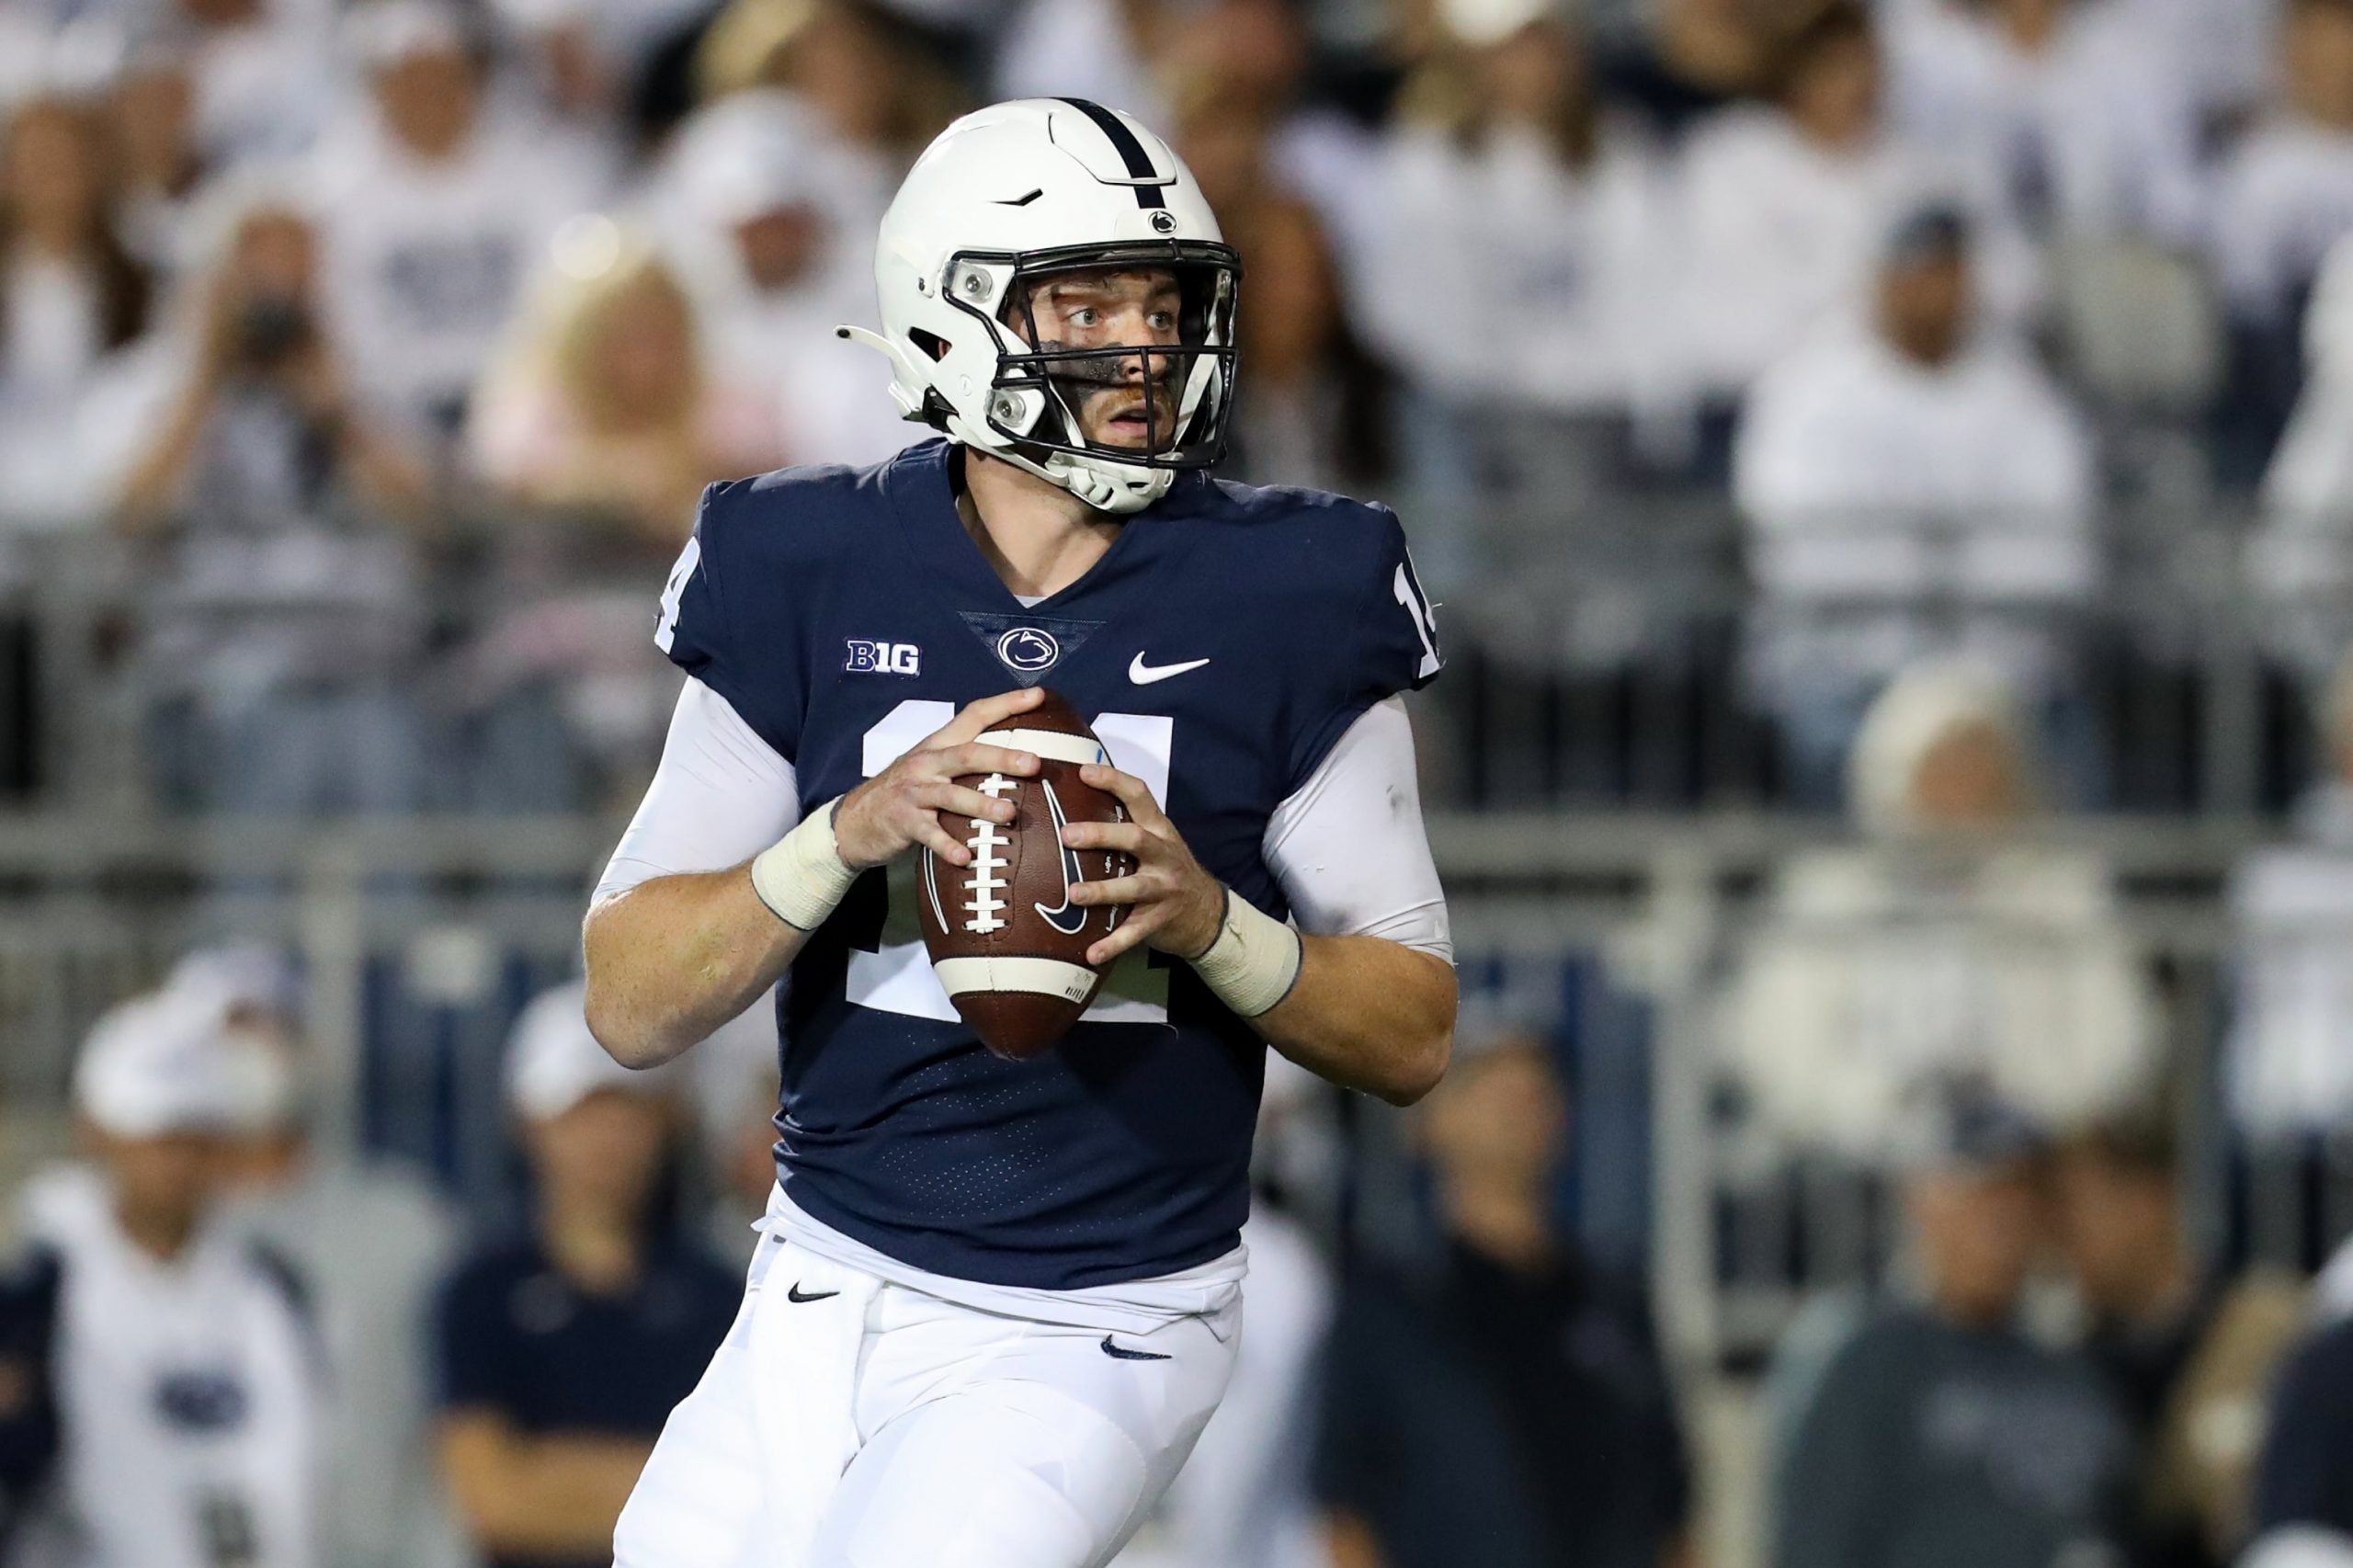 Penn State football 2022 season preview, predictions & best bets